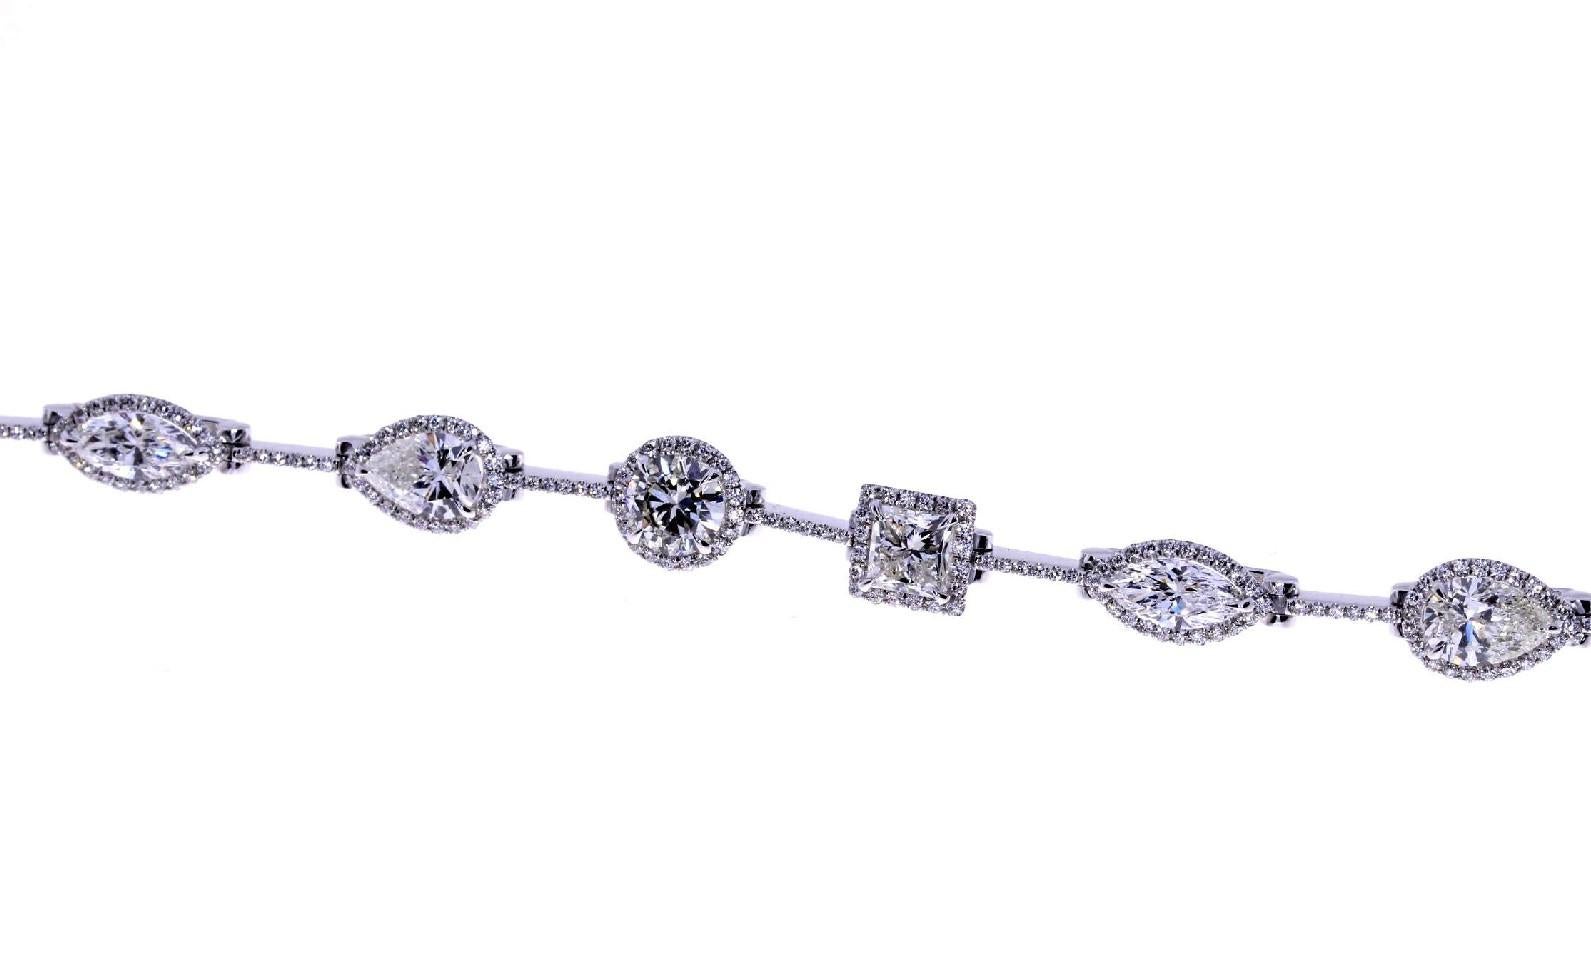 Handmade
18K White Gold
10.83ct Total Diamond Weight
Includes Round, Marquise, Pear, & Princess Cut Diamonds
Designed, Handpicked, & Manufactured From Scratch In Los Angeles Using Only The Finest Materials and Workmanship